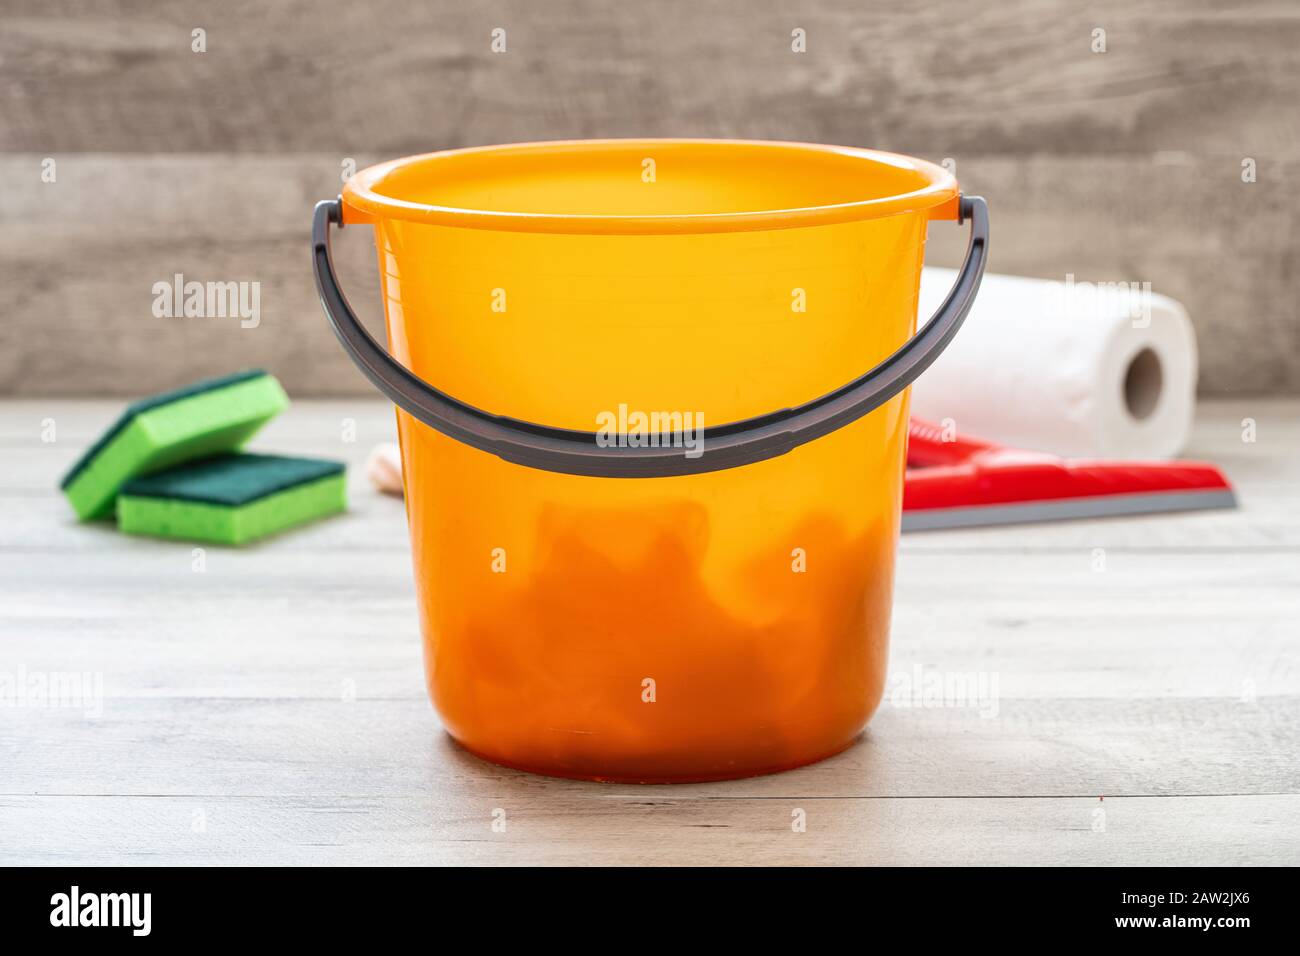 https://c8.alamy.com/comp/2AW2JX6/cleaning-bucket-orange-color-on-the-floor-home-interior-wood-floor-background-domestic-household-or-business-sanitary-cleaning-2AW2JX6.jpg